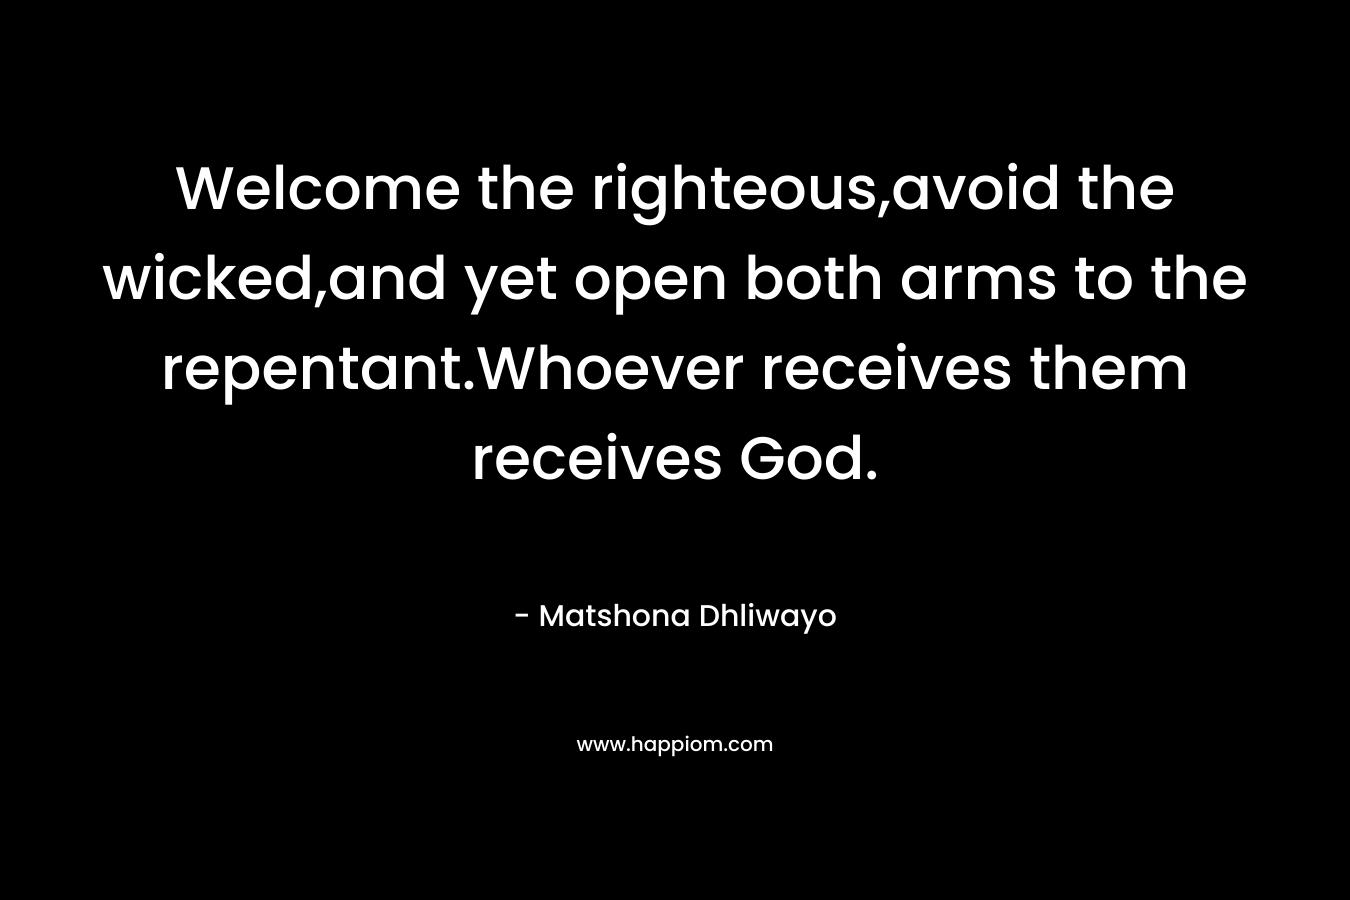 Welcome the righteous,avoid the wicked,and yet open both arms to the repentant.Whoever receives them receives God.